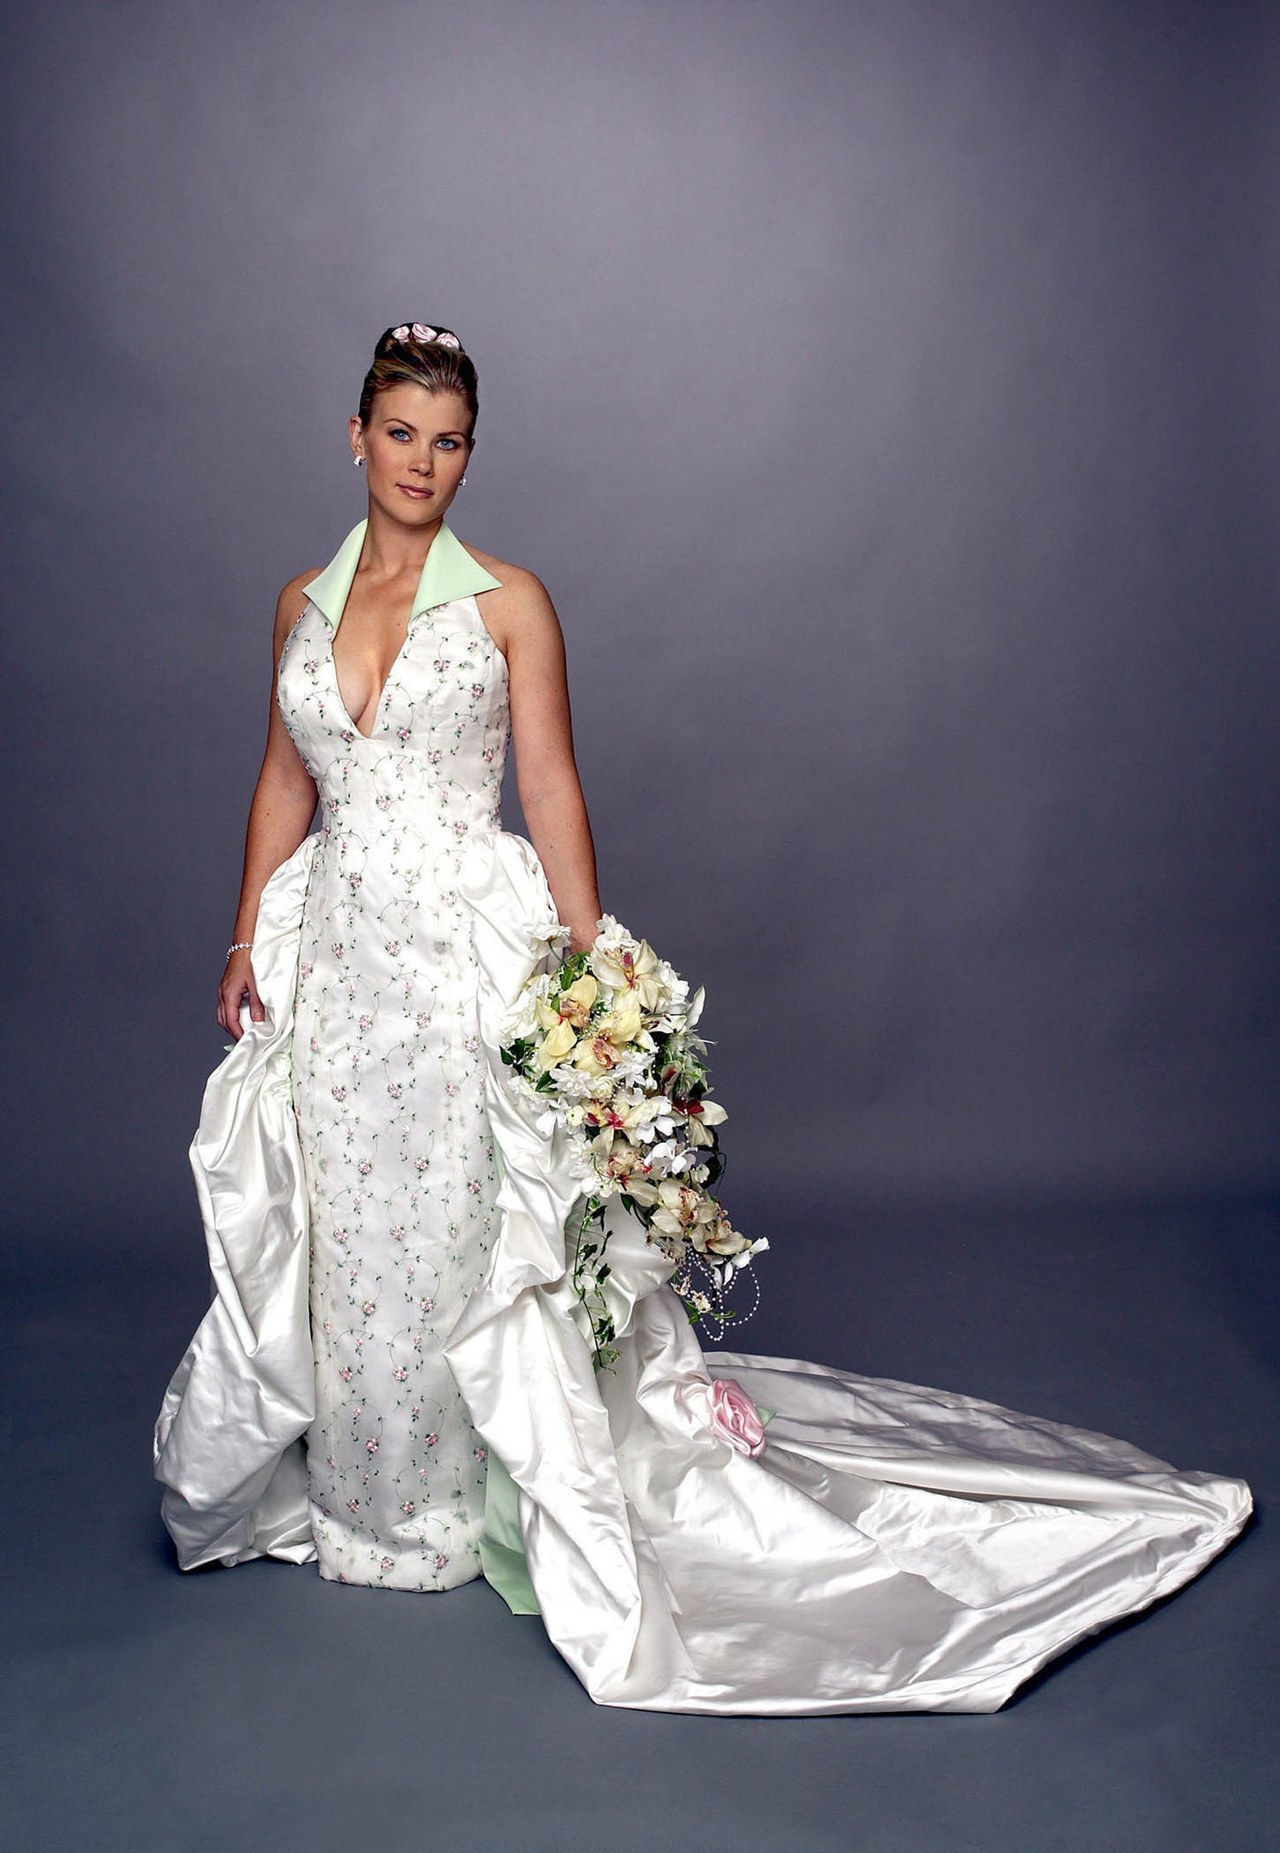 6 memorable days of our lives wedding dresses 1201 getty